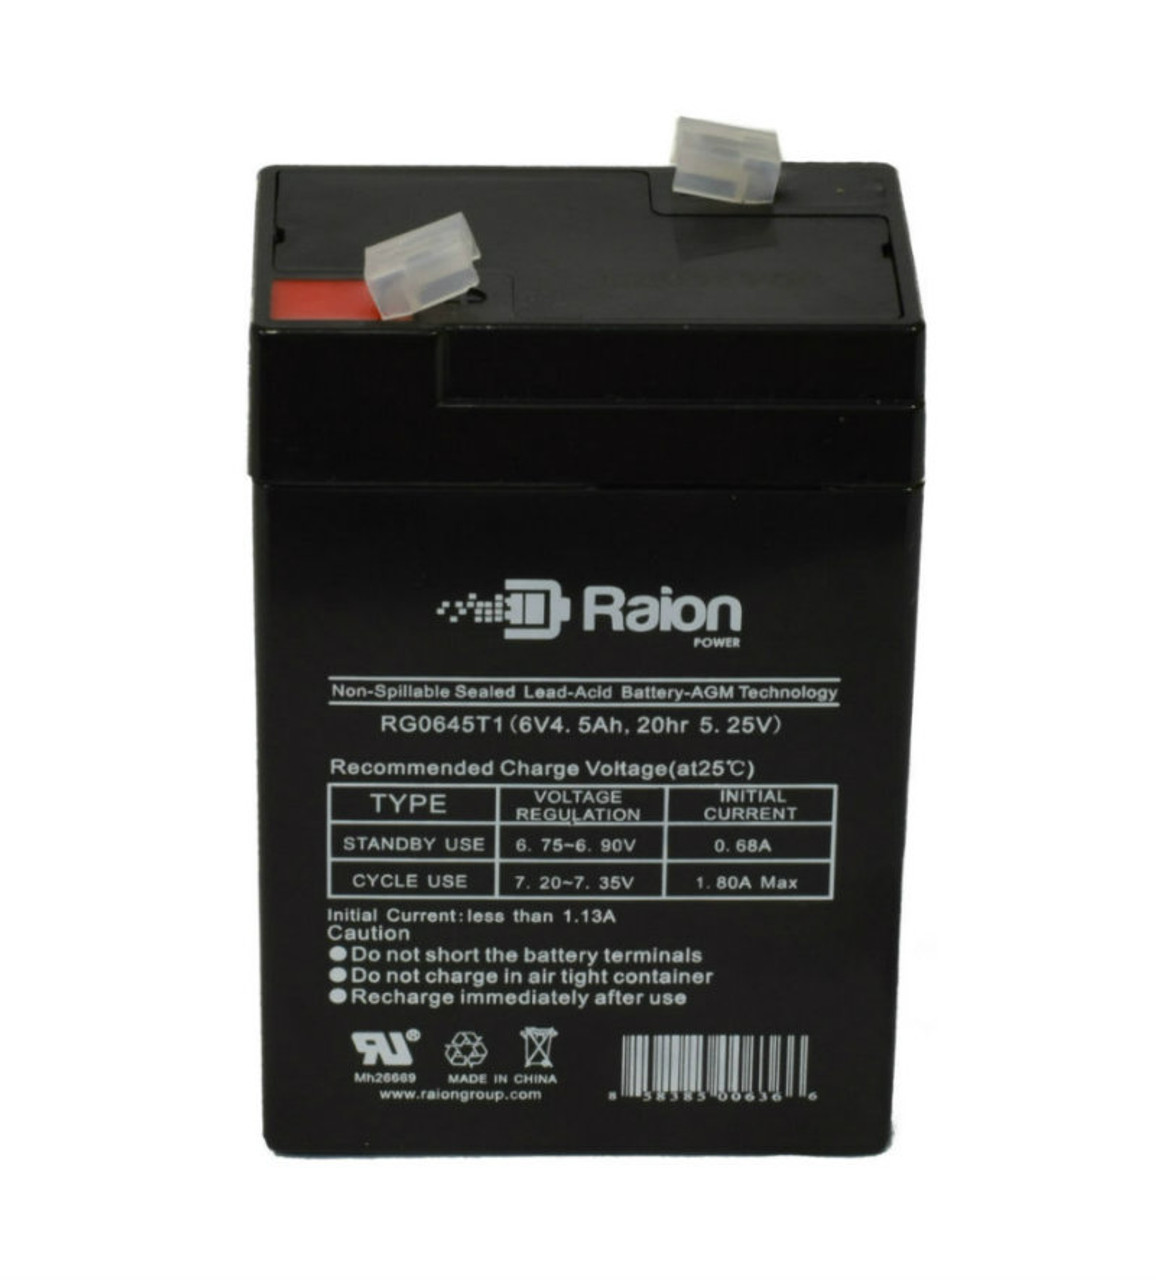 Raion Power RG0645T1 Replacement Battery Cartridge for Kaiying KS4-6A